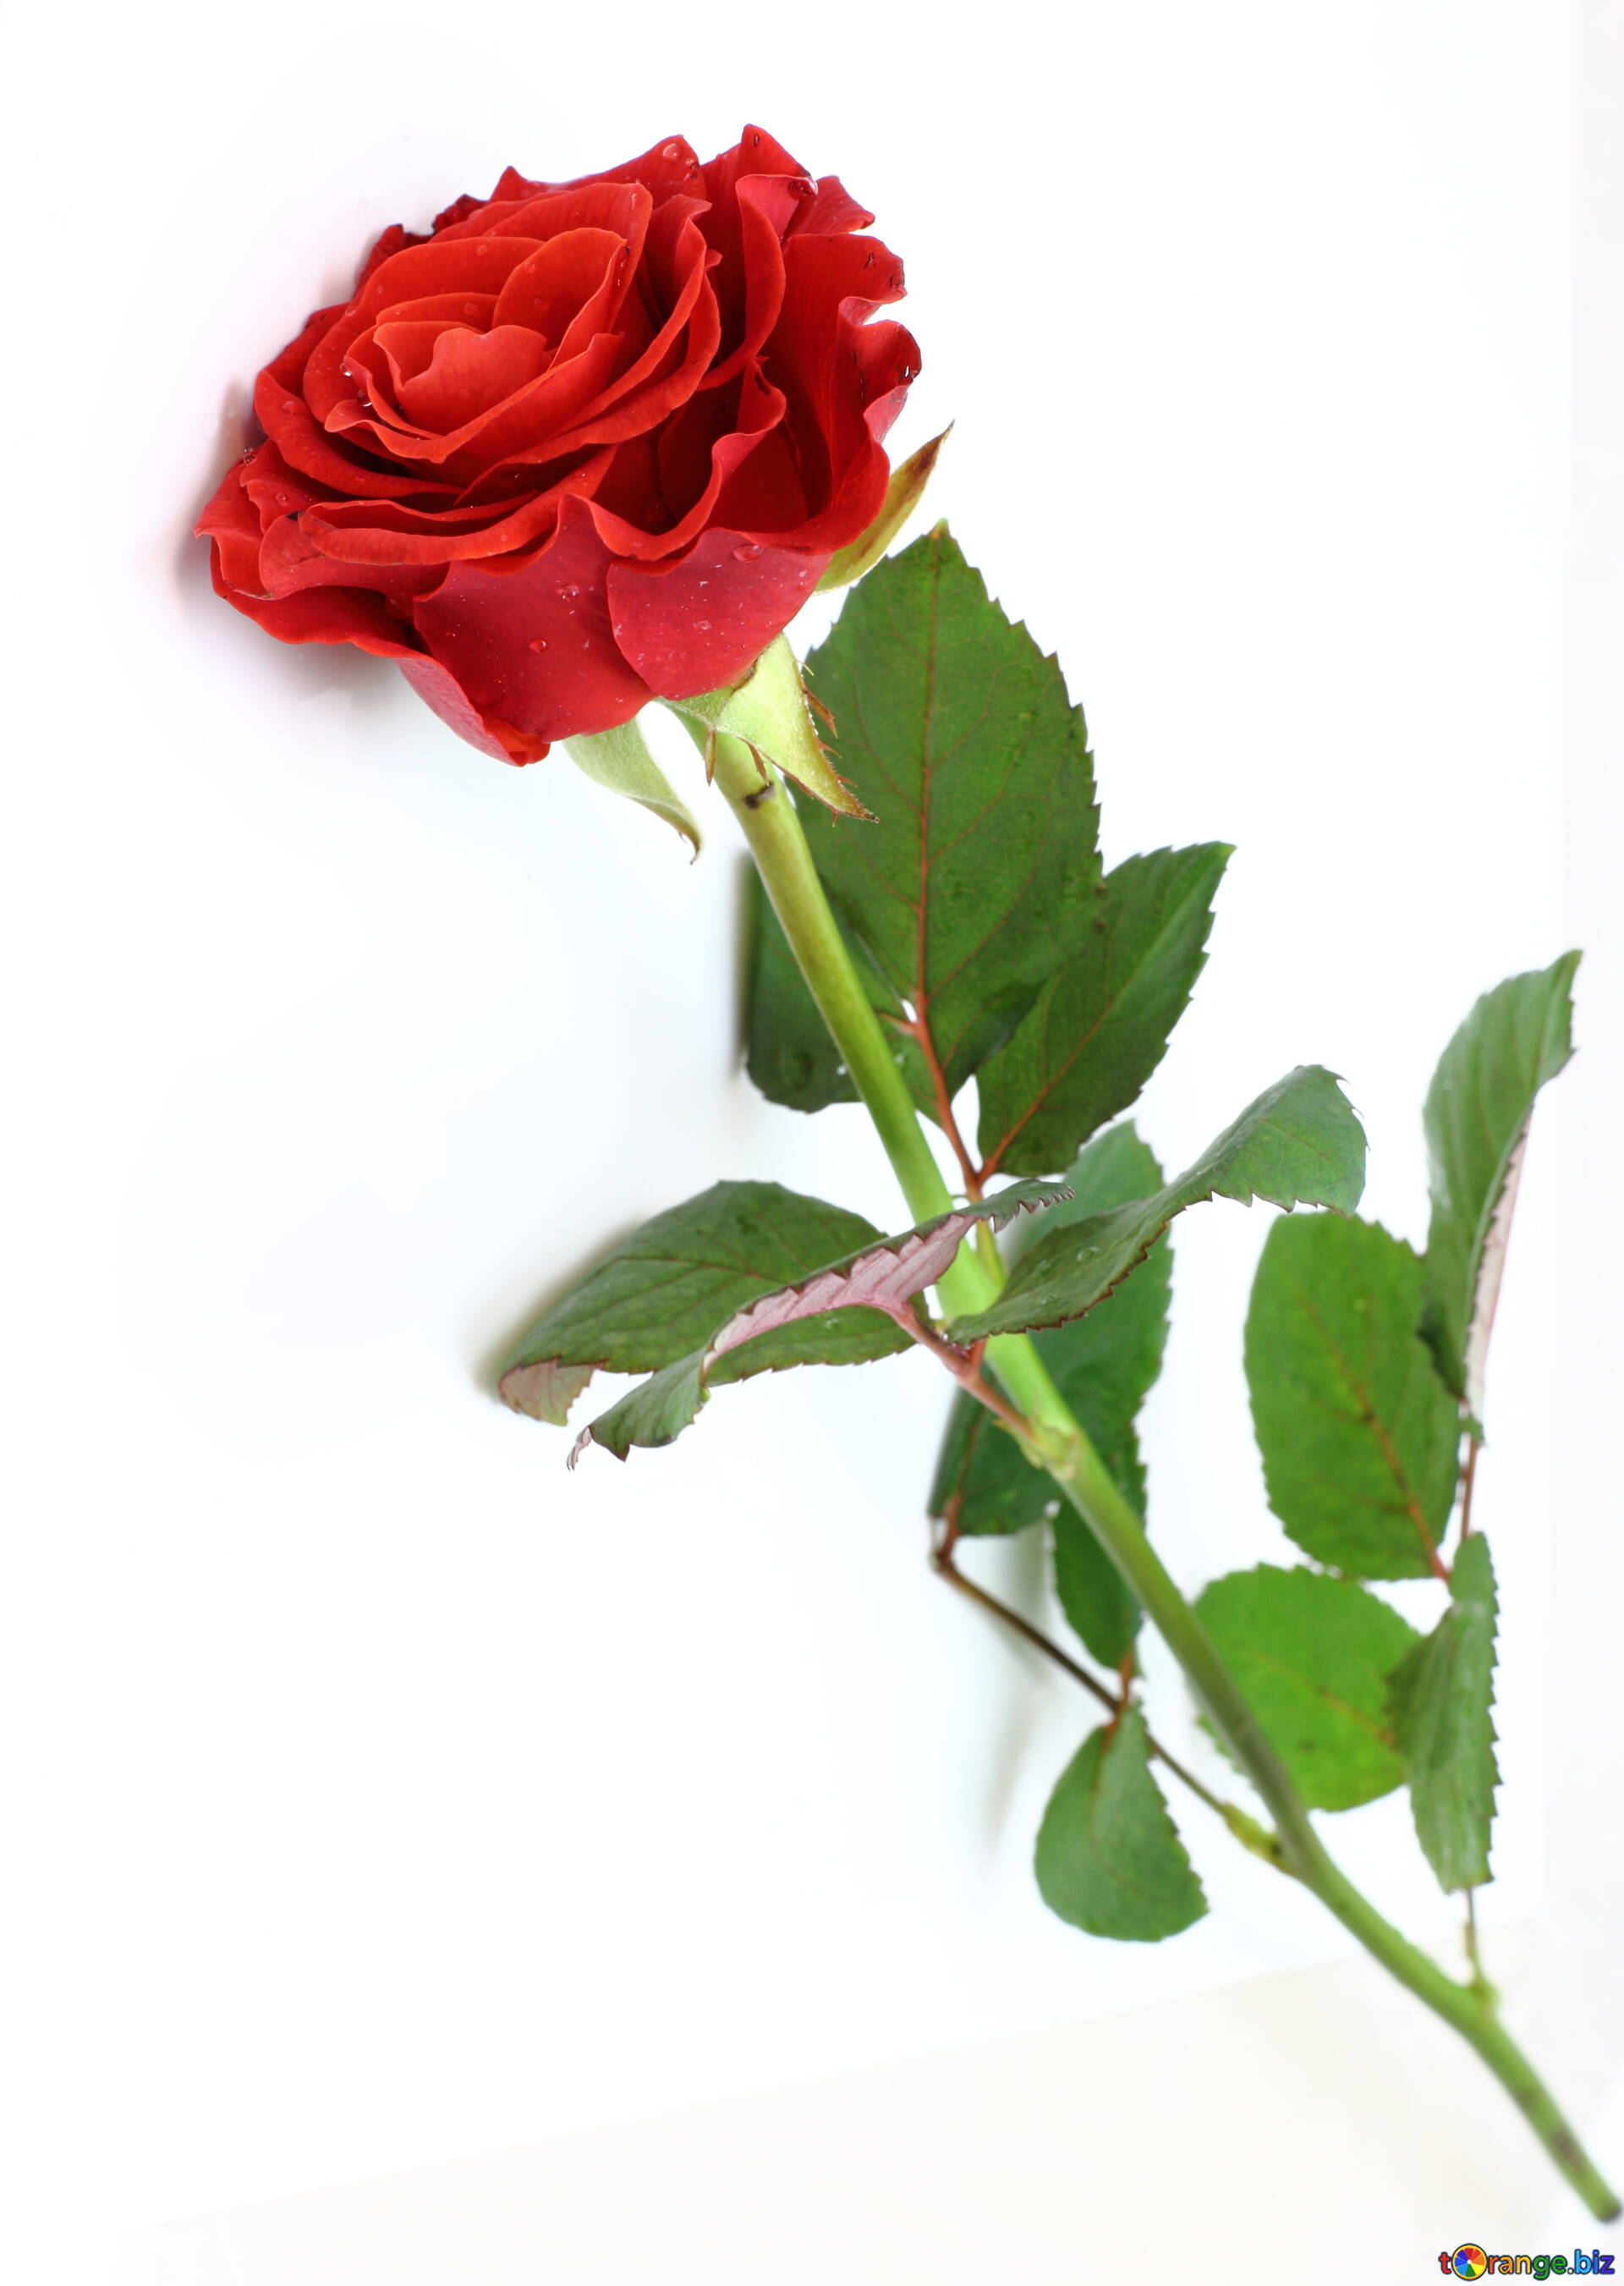 Flowers roses isolated image red on white images rose flower № 16889 |   ~ free pics on cc-by license